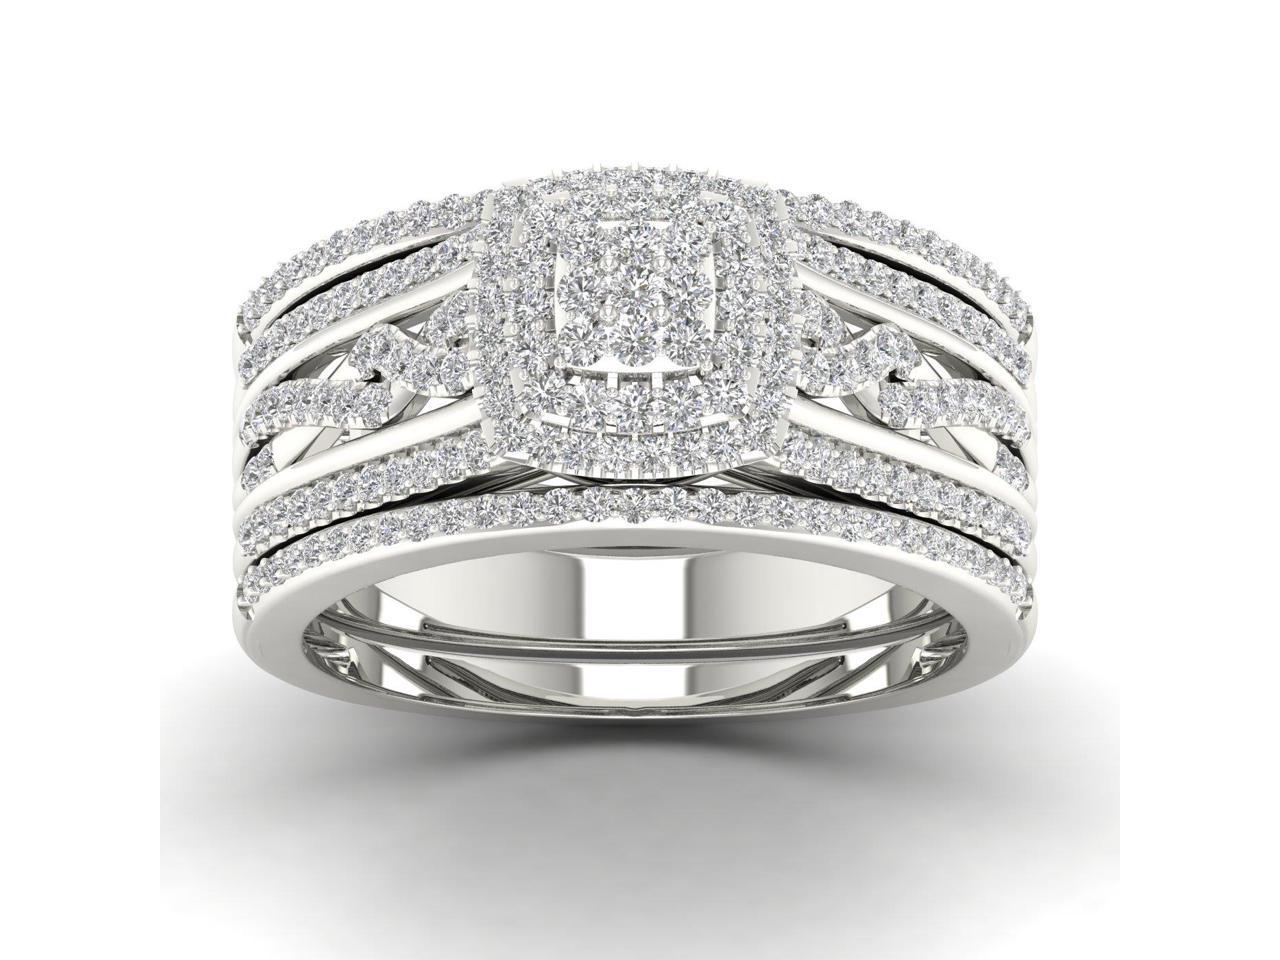 Halo Bridal Engagement Ring Set with 5/8ct TDW Natural Round Cut Diamonds